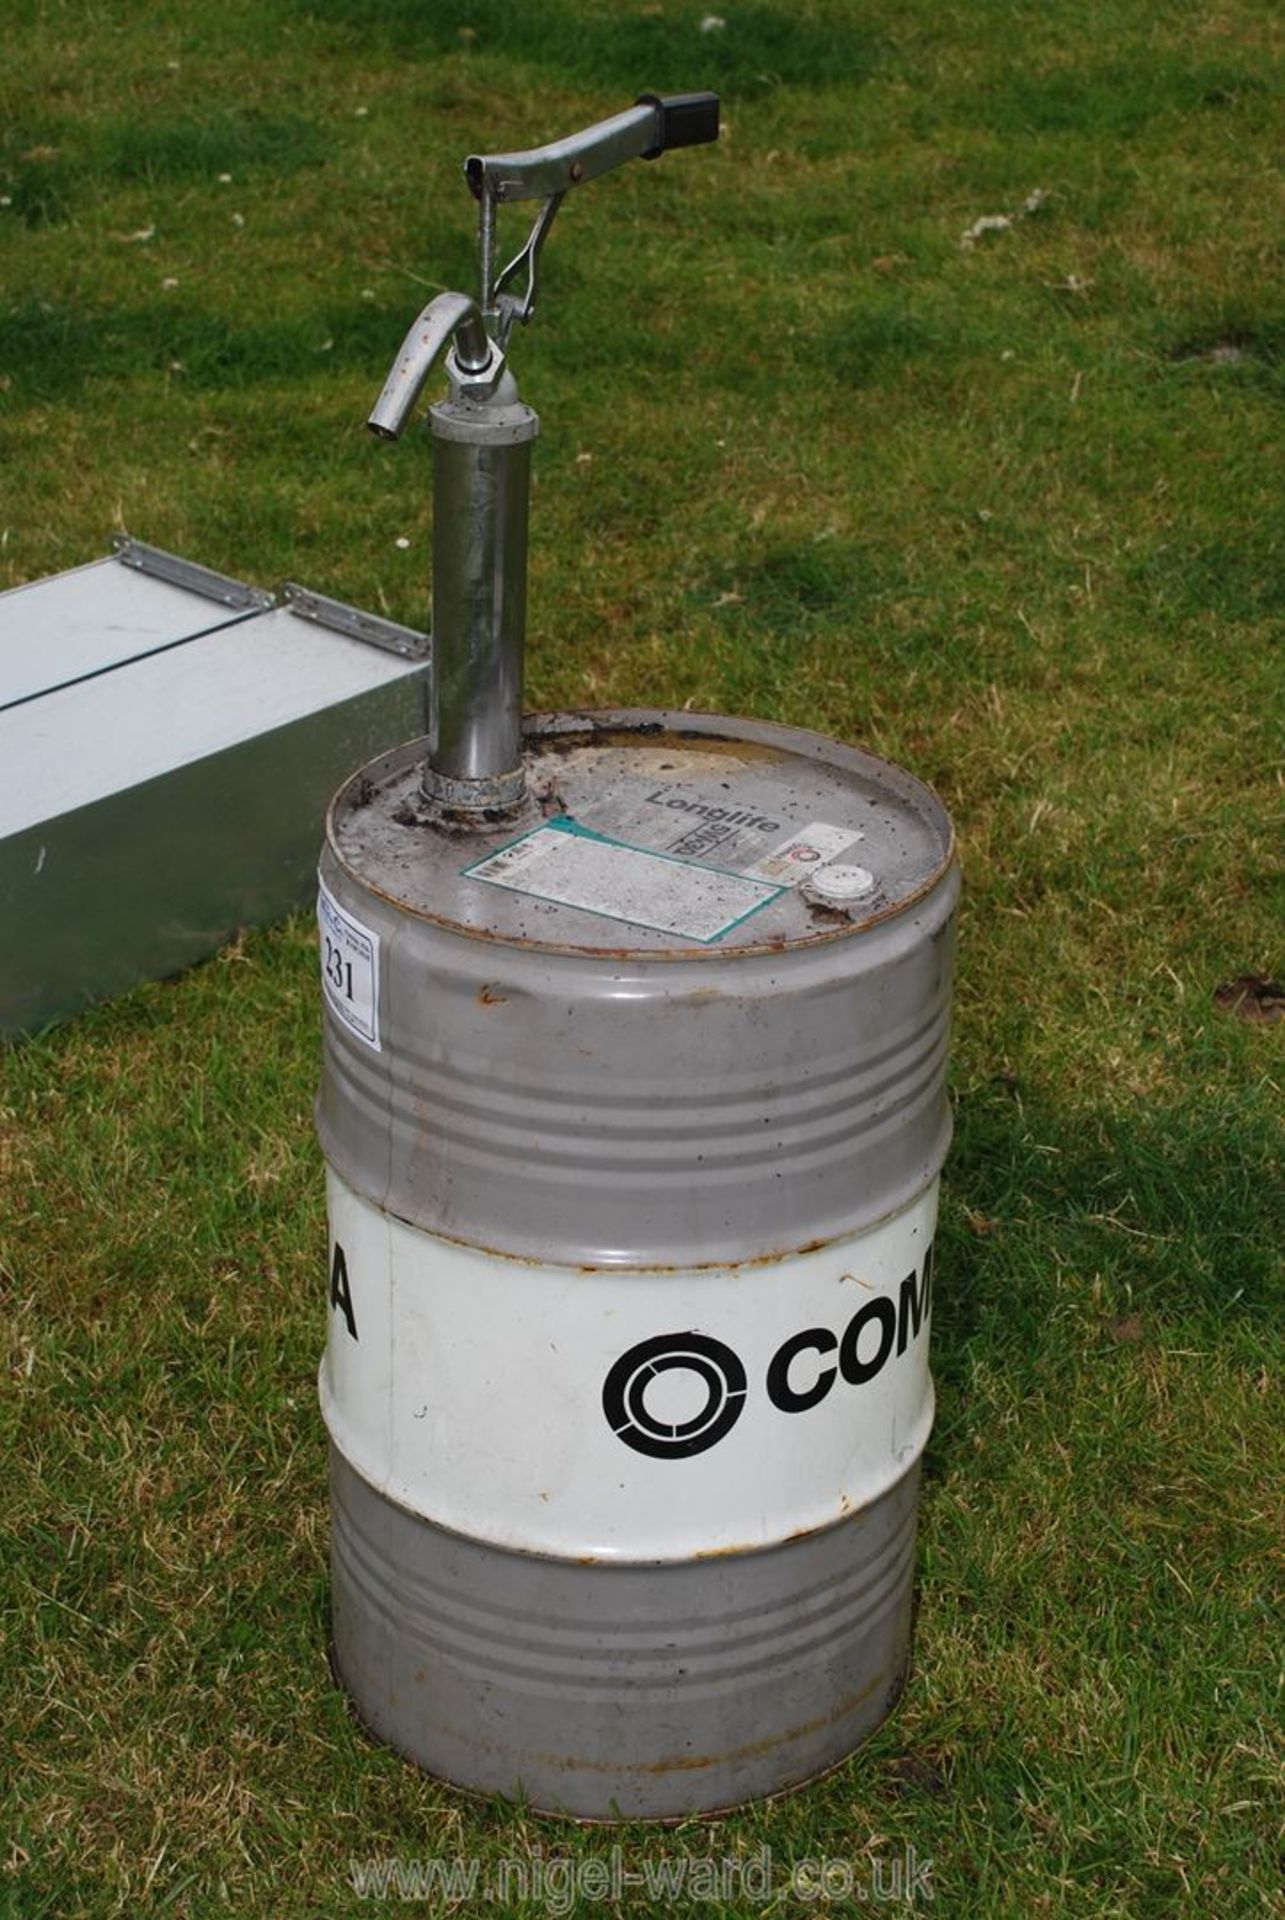 An oil drum with pump - empty.